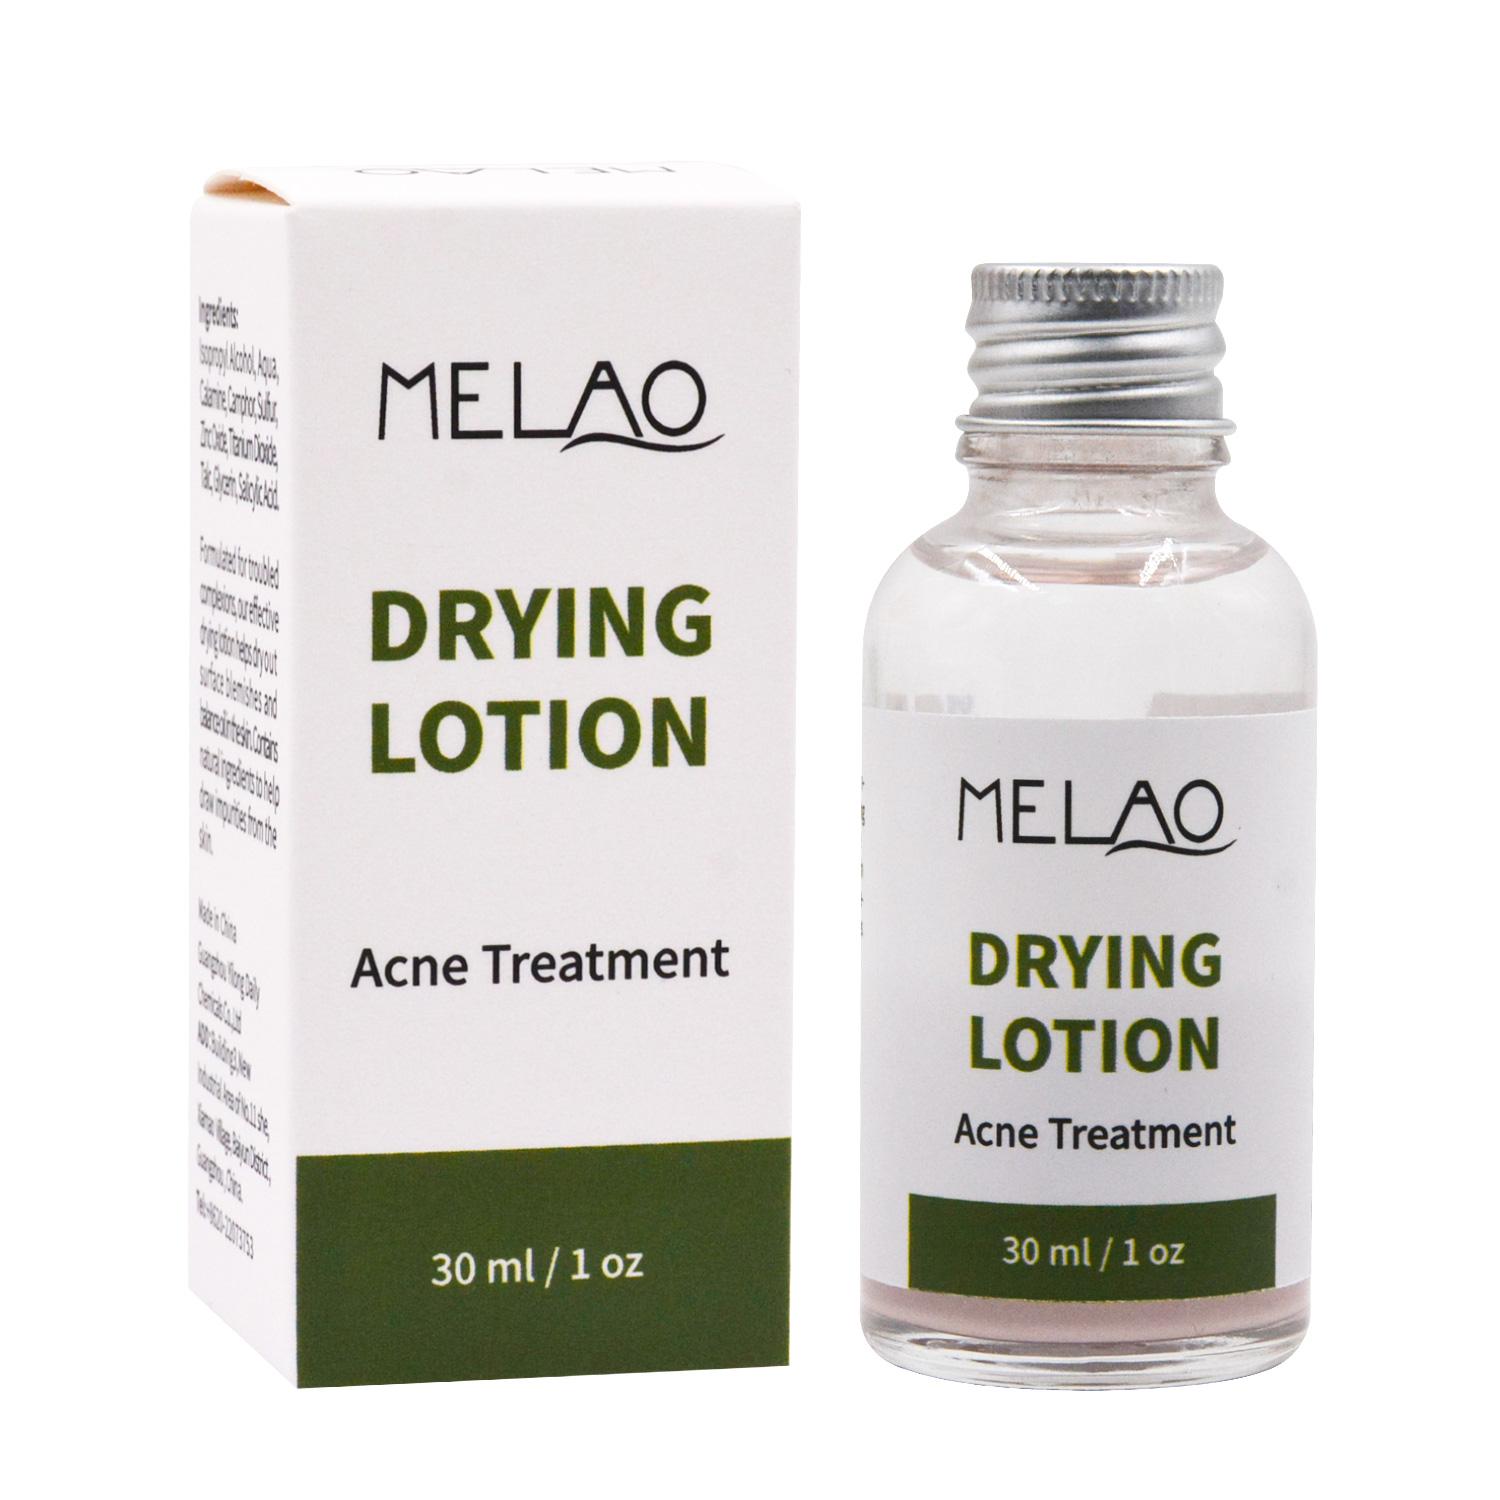 MELAO Private Label Anti Acne Moisturizing Drying Lotion For Dry Ance Skin